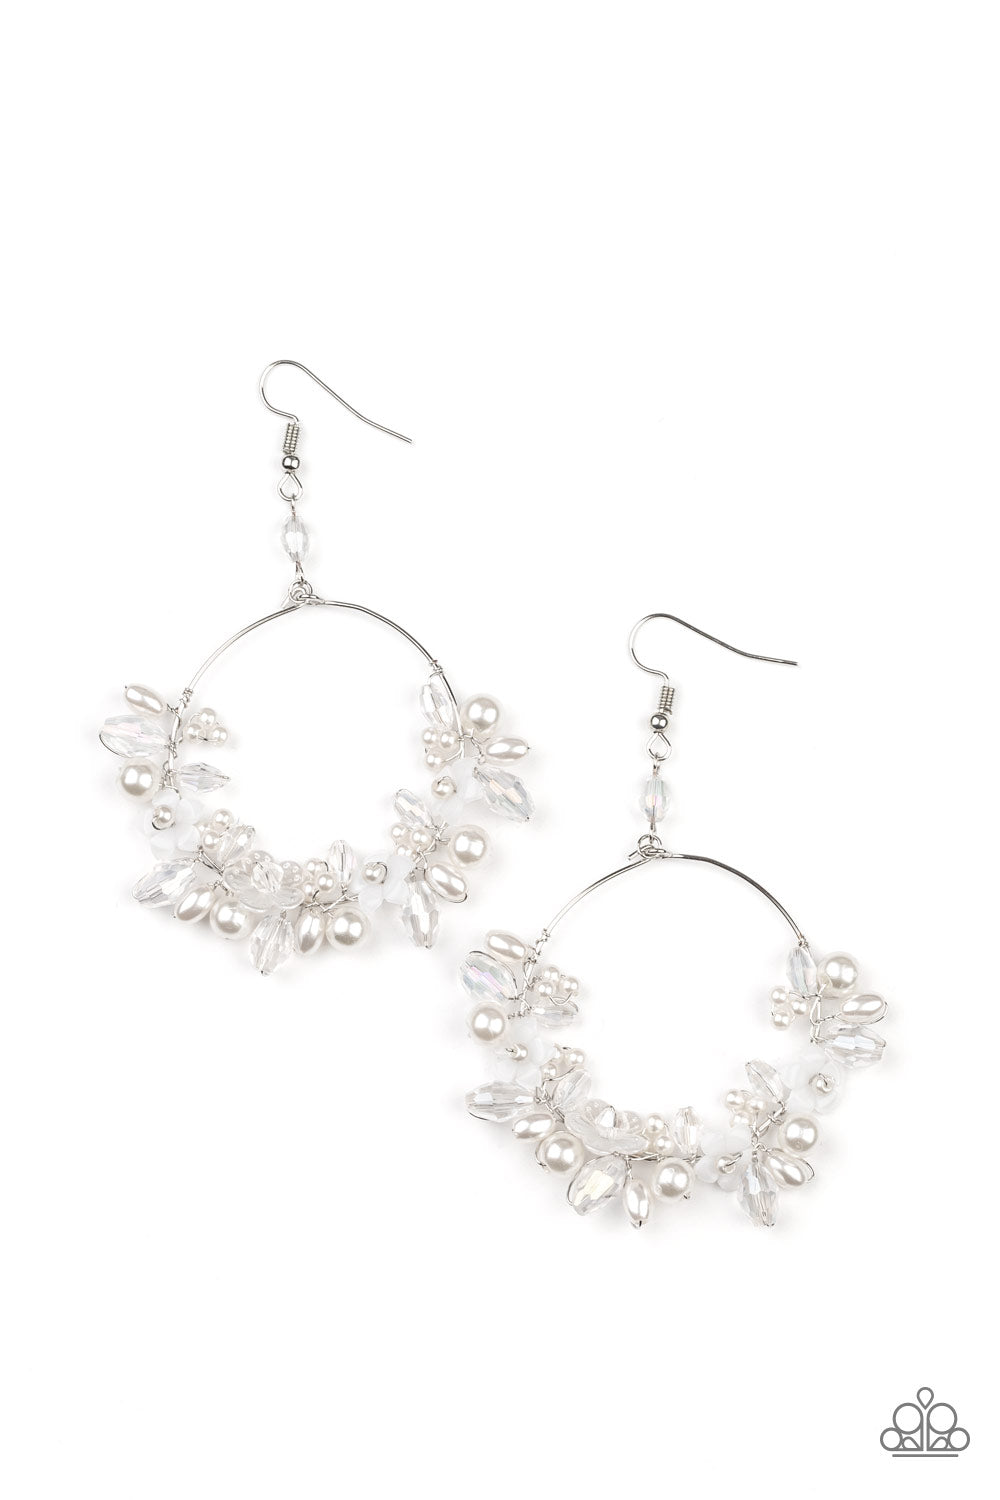 Floating Gardens - White Pearl Floral - Silver Earrings - Paparazzi Accessories - A timeless collection of iridescent crystal-like accents, dainty white pearls, and white floral frames delicately cluster along the bottom of a silver hoop, creating a glamorous glow. Earring attaches to a standard fishhook fitting.